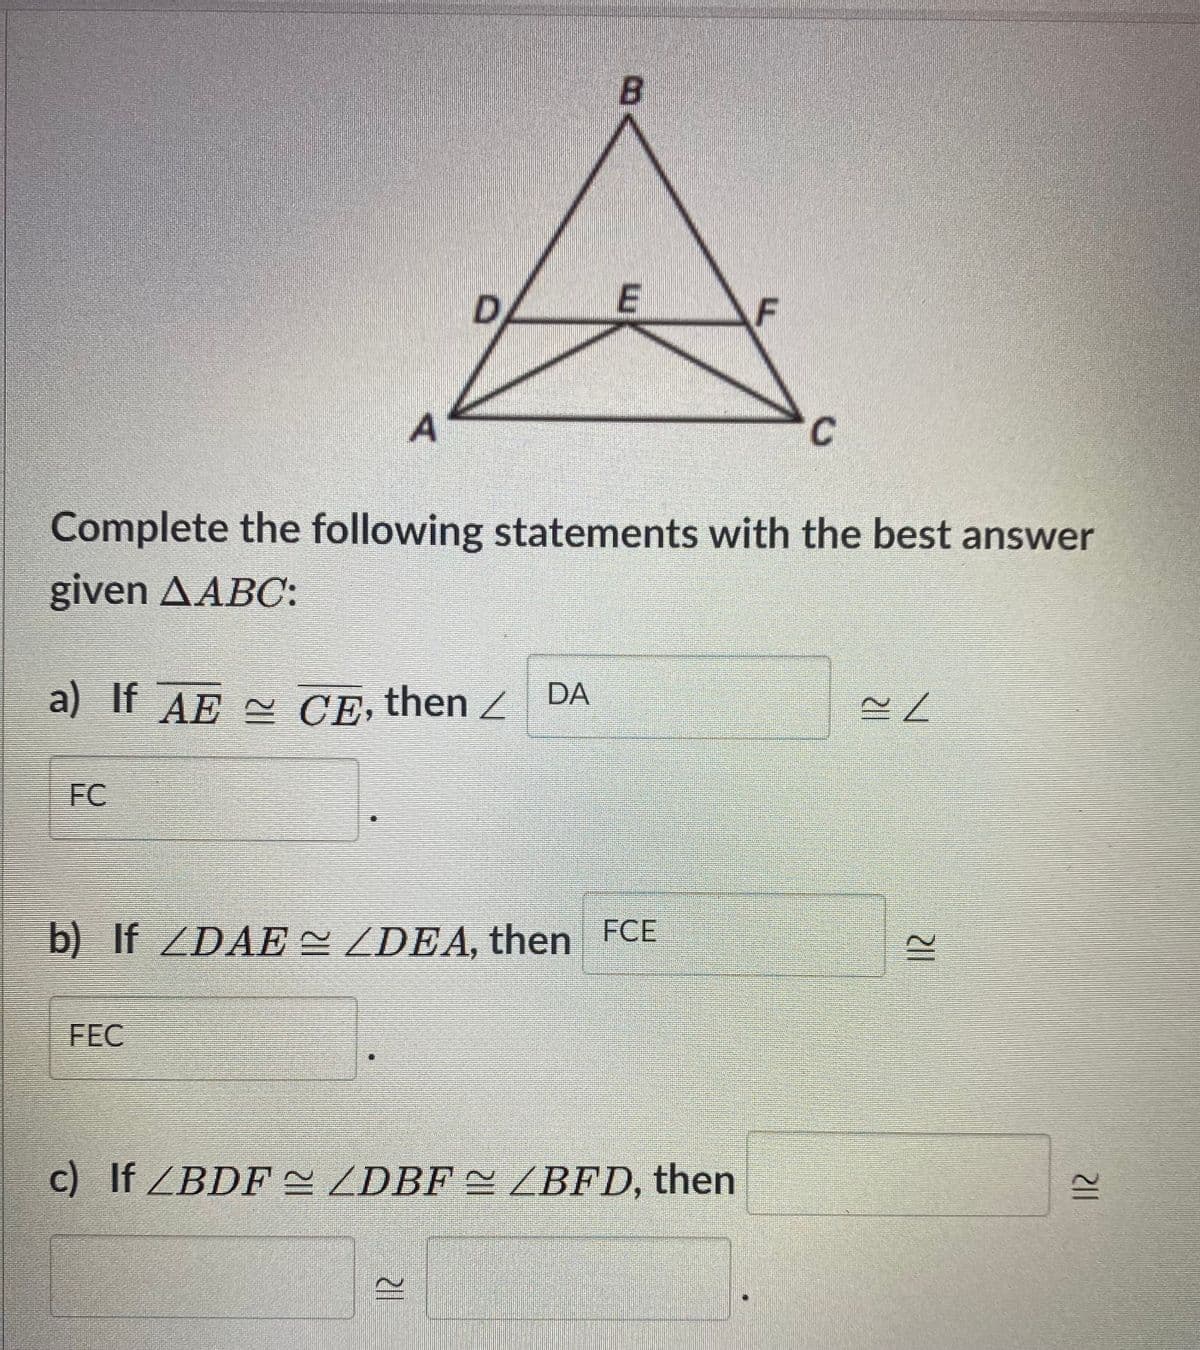 D.
F
Complete the following statements with the best answer
given AABC:
a) If AE CE, then Z DA
FC
b) If ZDAE ZDEA, then FCE
FEC
c) If ZBDF~ ZDBF = ZBFD, then
12
